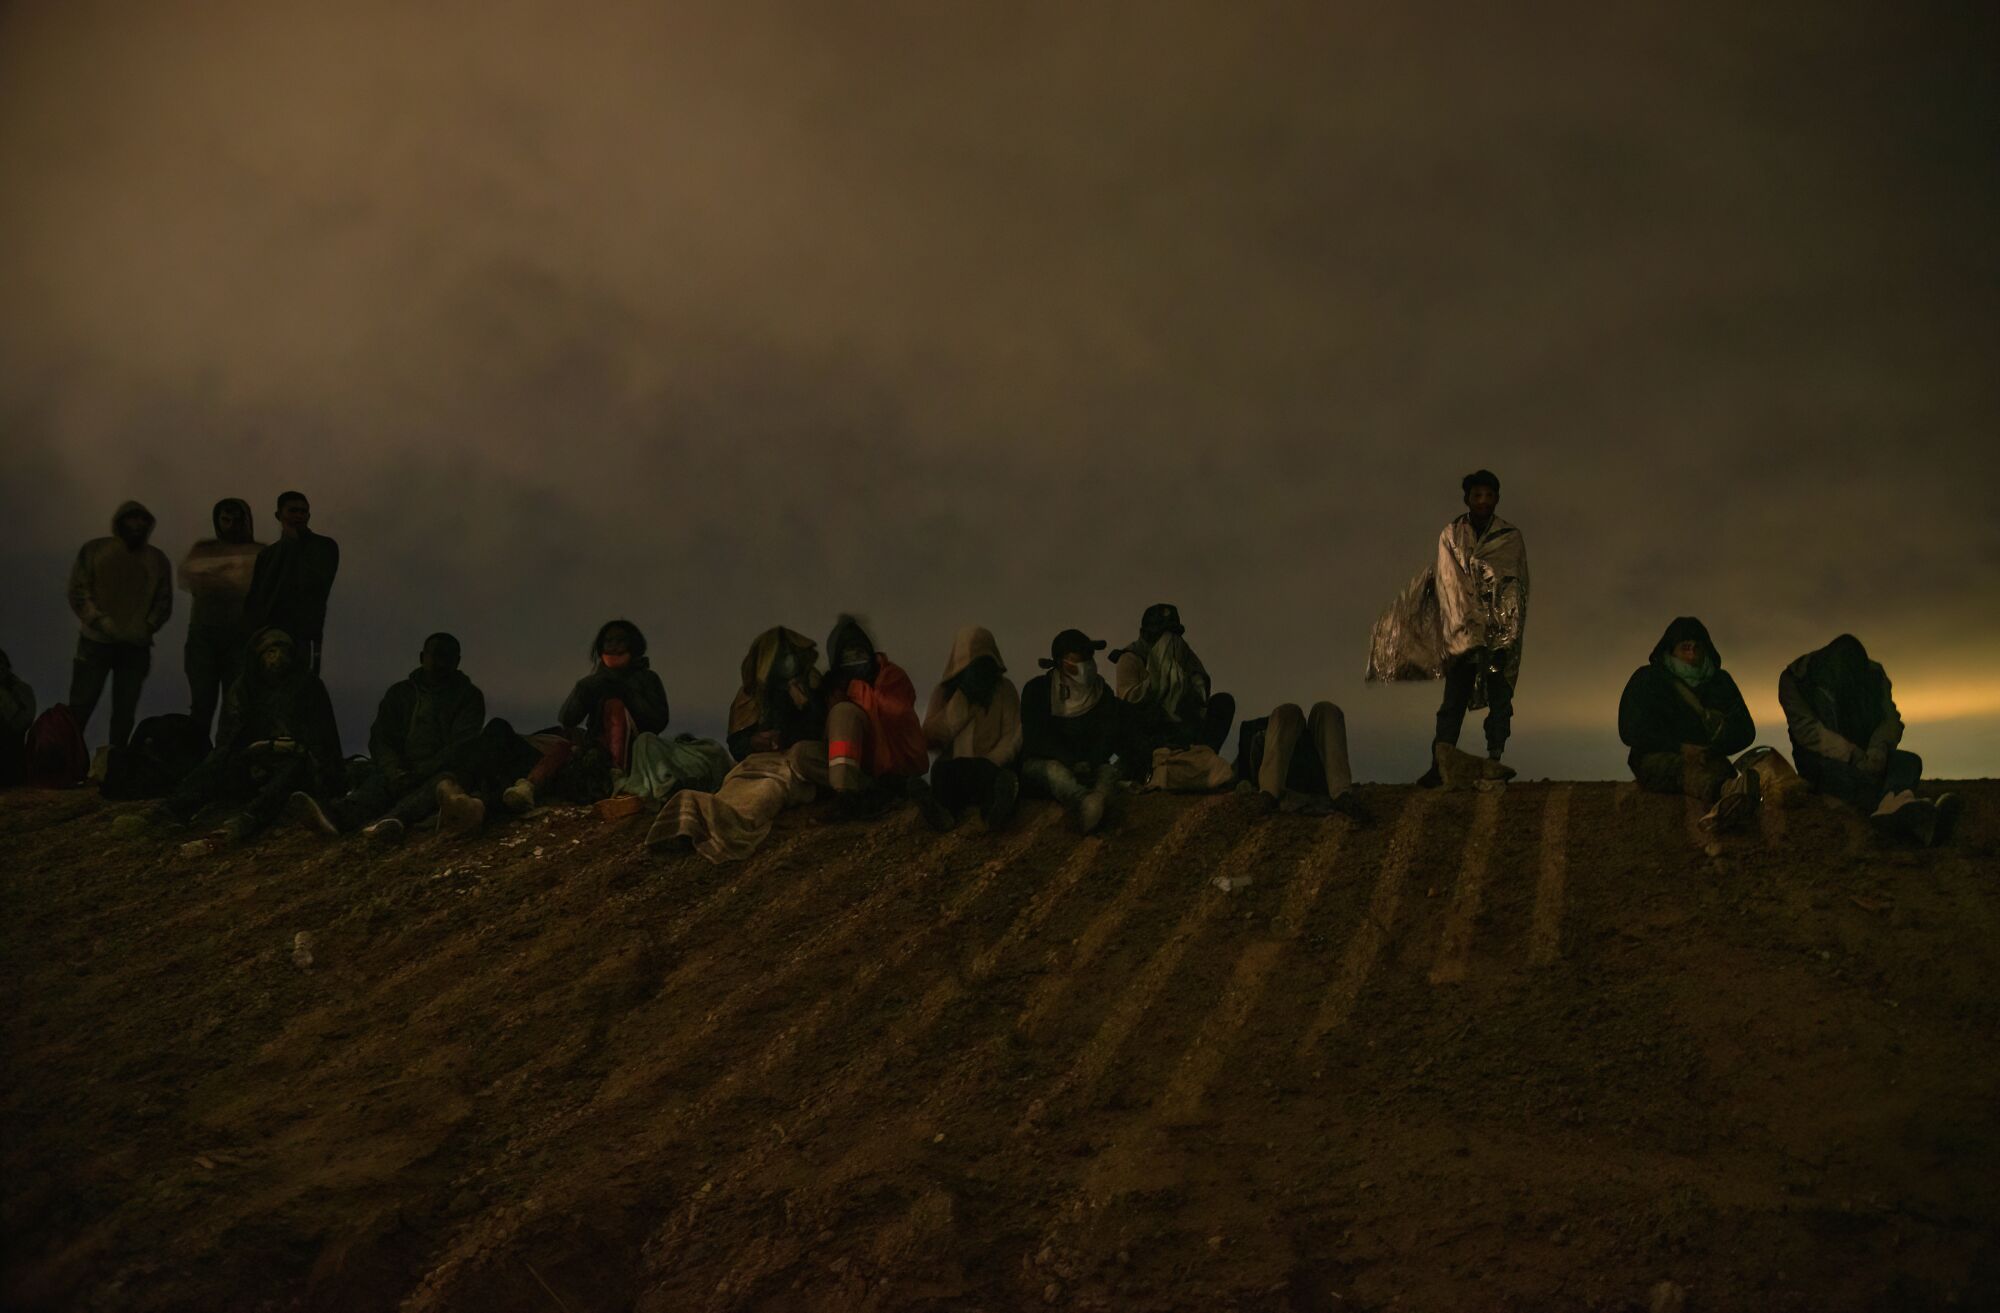 Migrants huddle in the shadows of the border wall and try to keep warm until Border Patrol agents arrive.